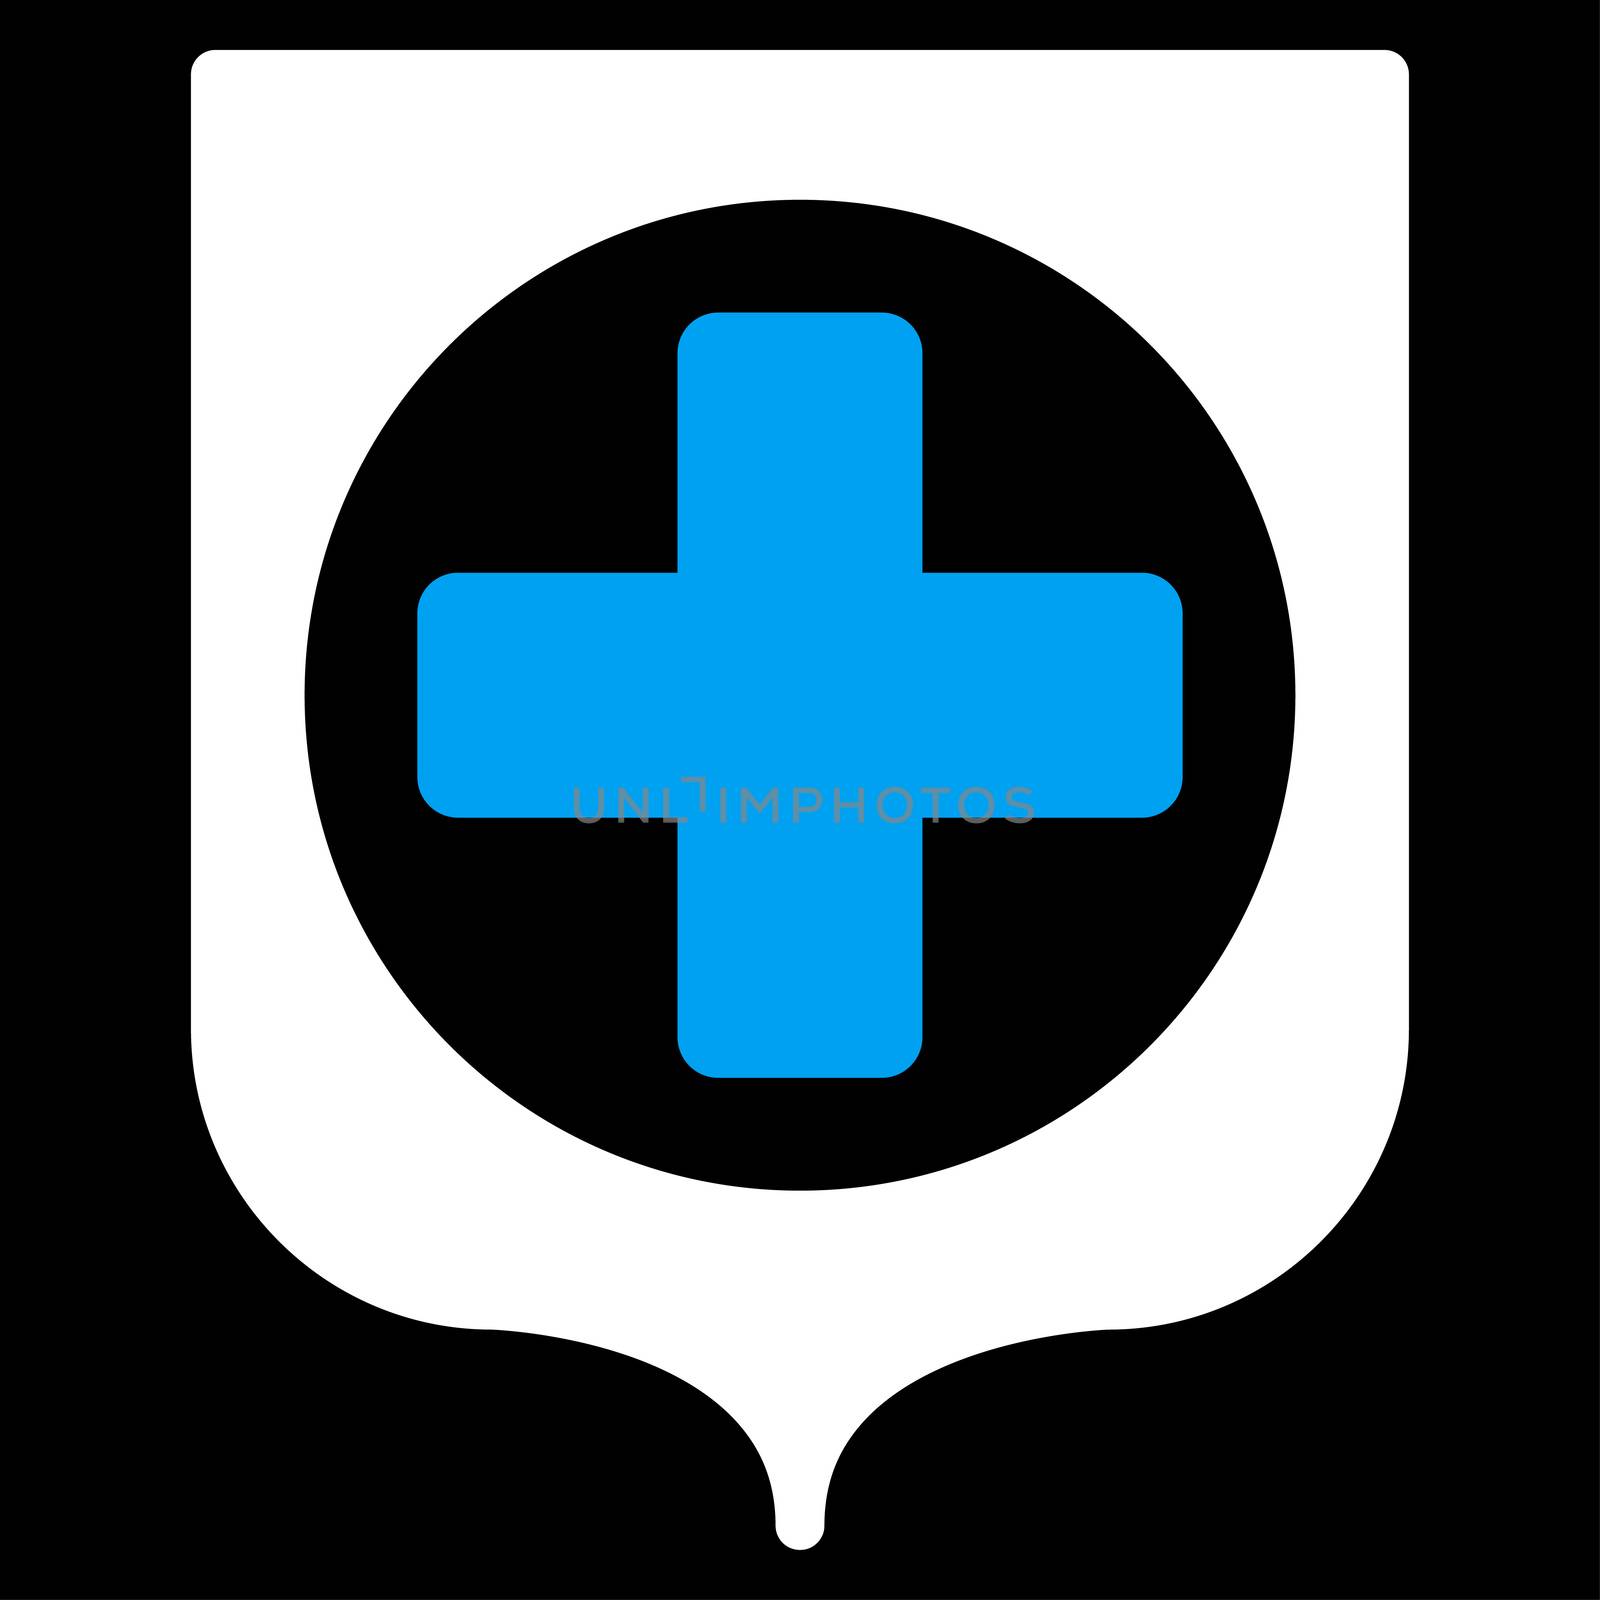 Medical Shield raster icon. Style is bicolor flat symbol, blue and white colors, rounded angles, black background.